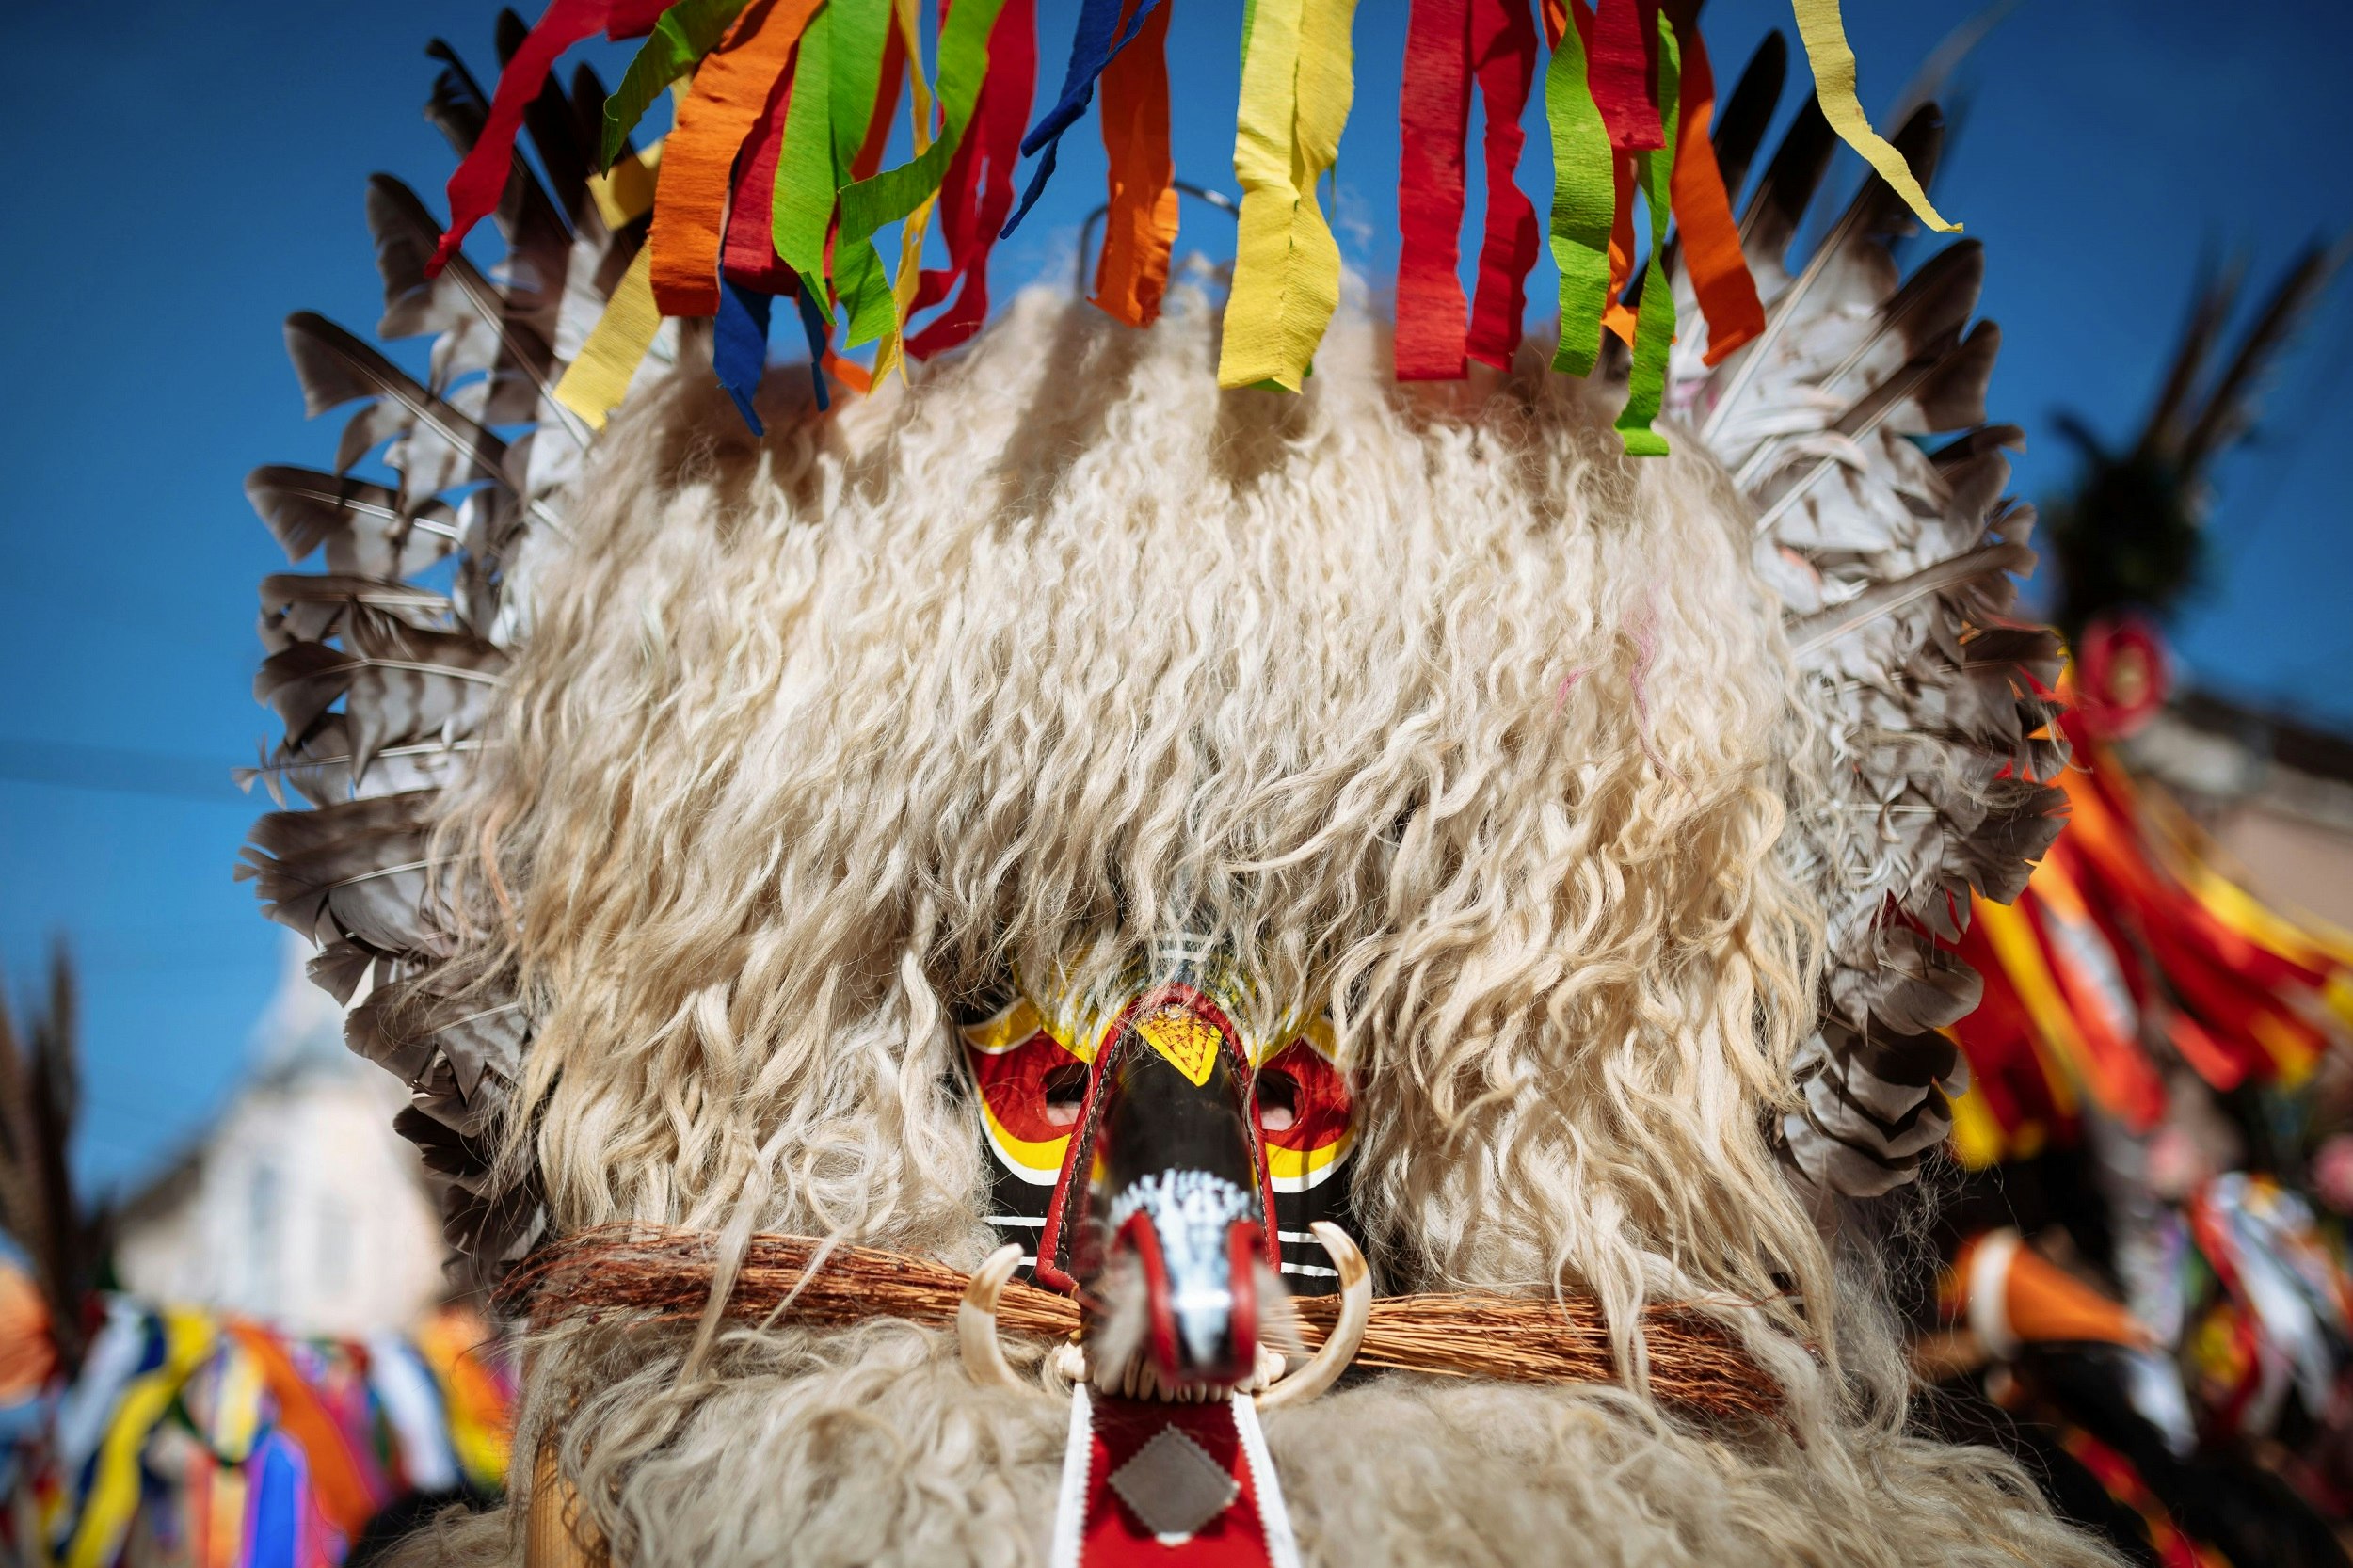 The furry head of a kurent, with a leather mask completely covering the face. Feathers and colourful ribbons ring the top of the headdress